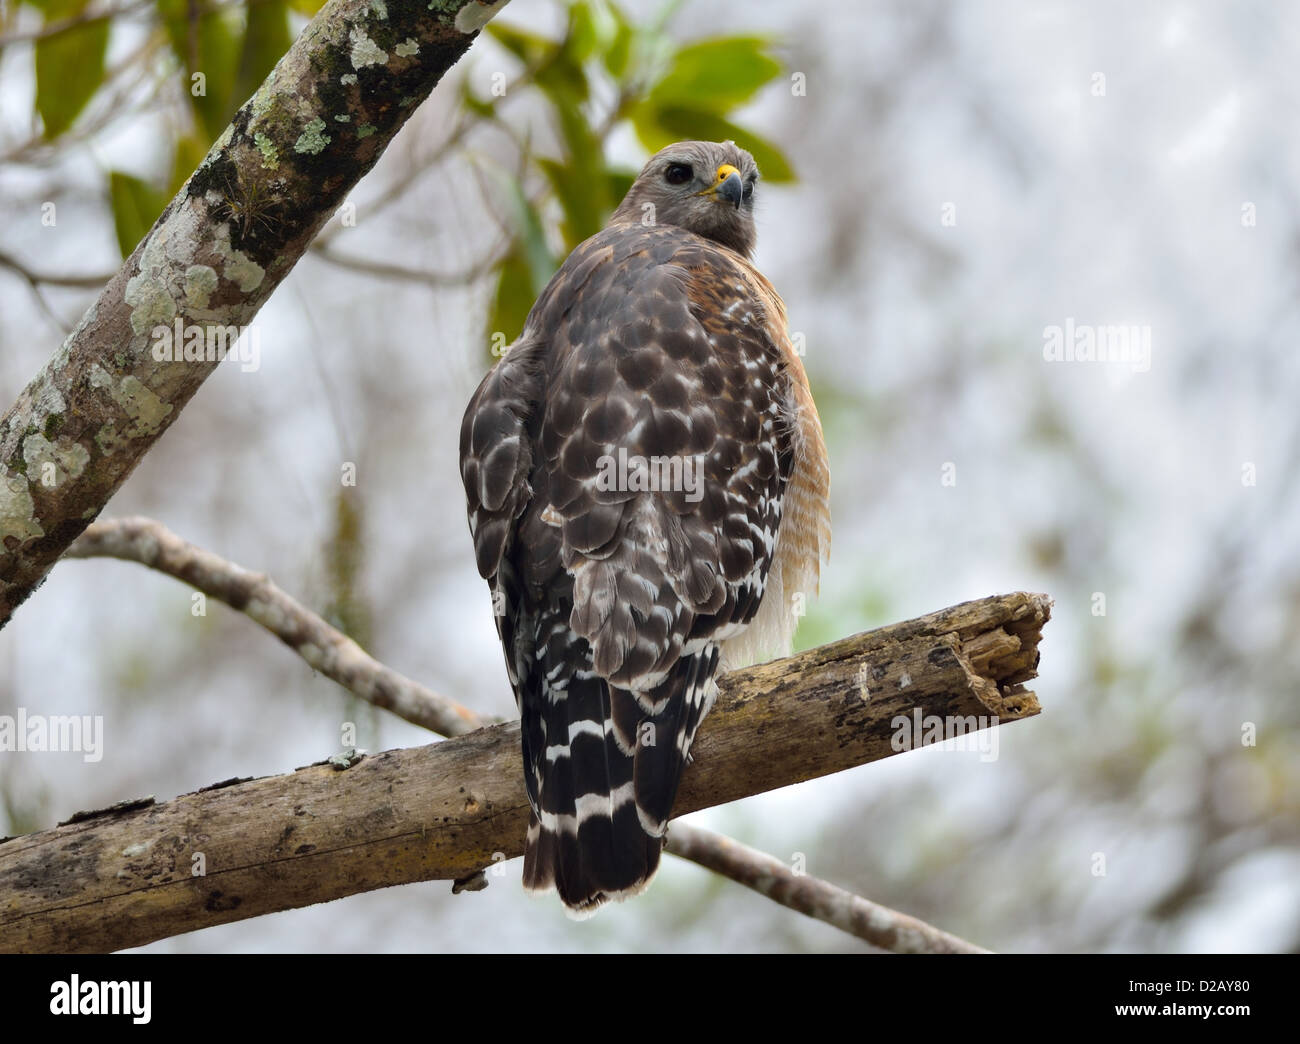 A red-shouldered hawk standing on a tree limb. Big Cypress National Preserve, Florida, USA. Stock Photo